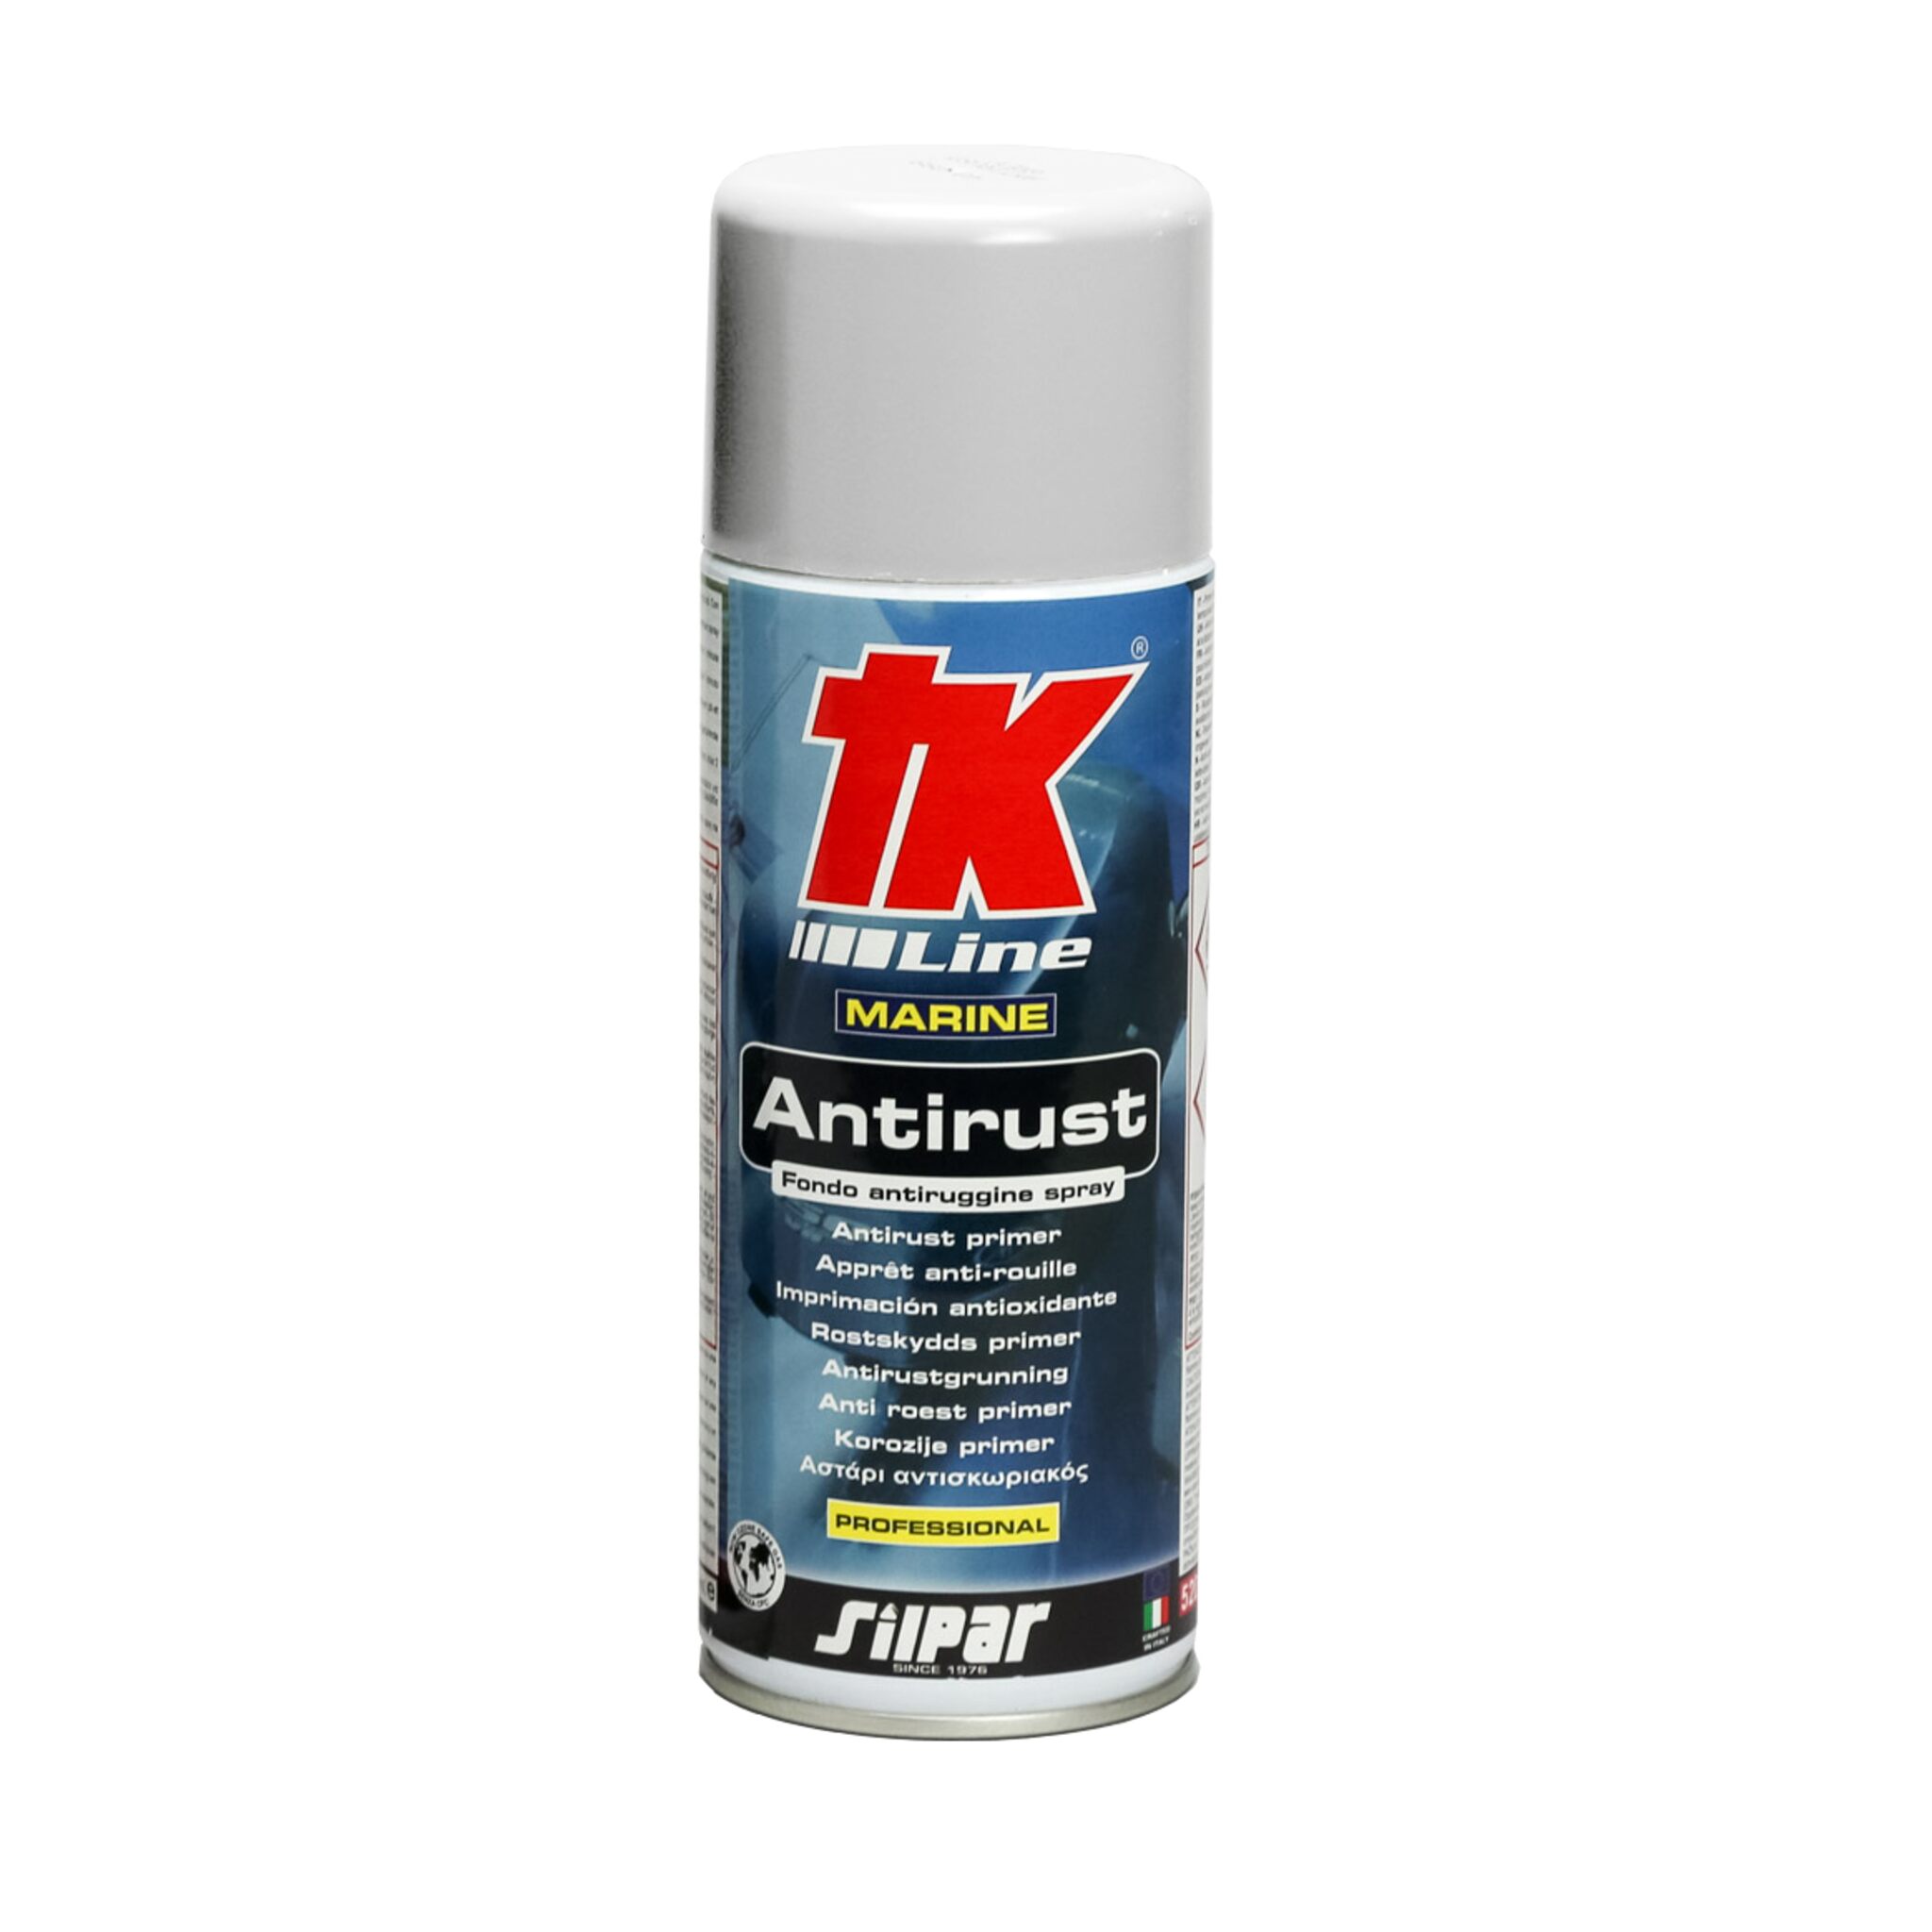 TK Line paint spray for drives